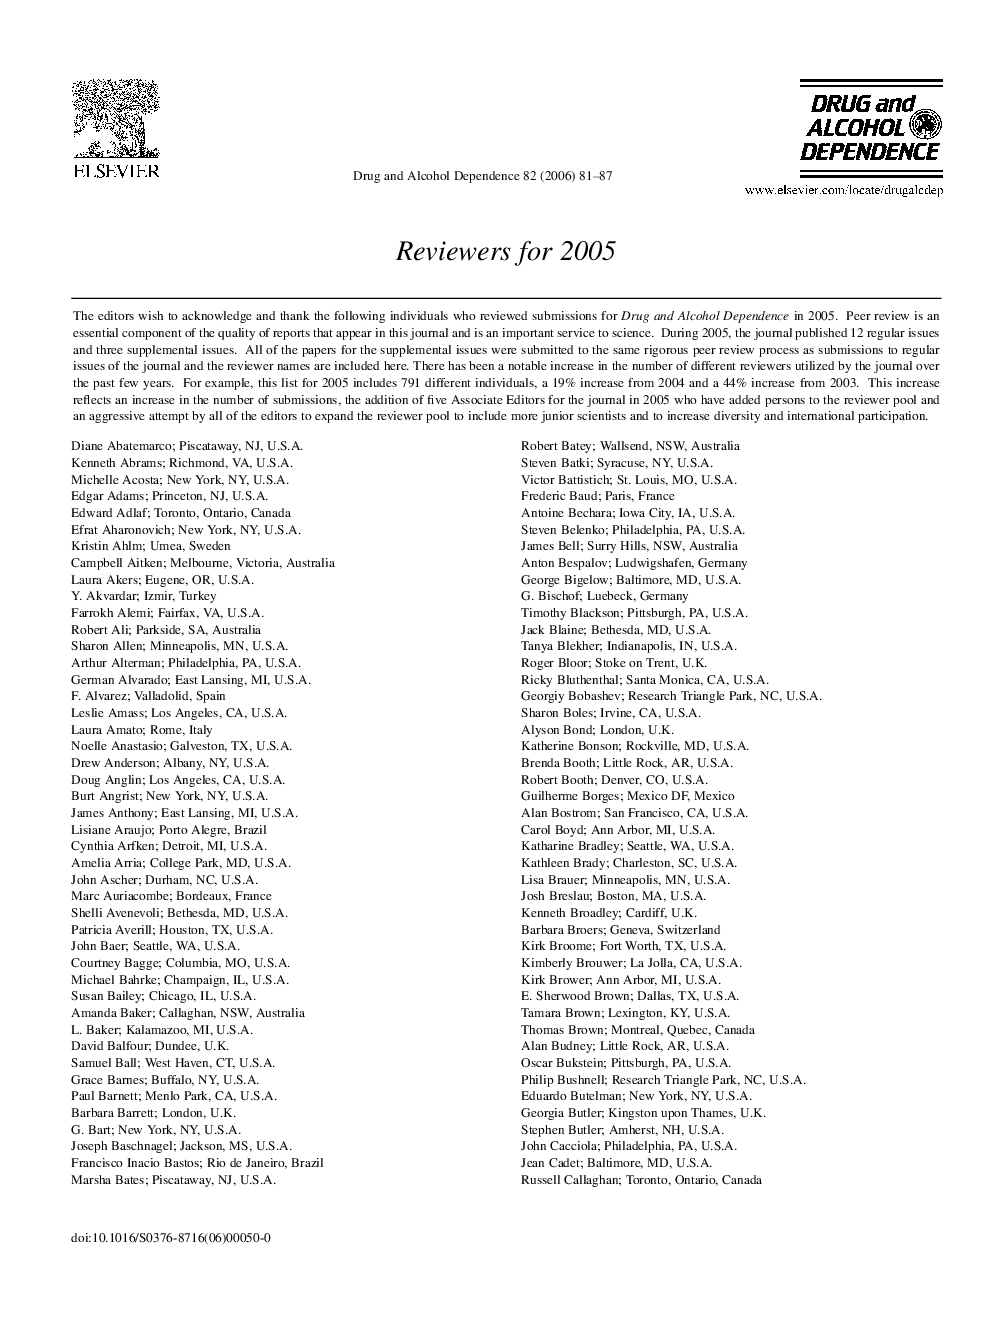 Reviewers for 2005